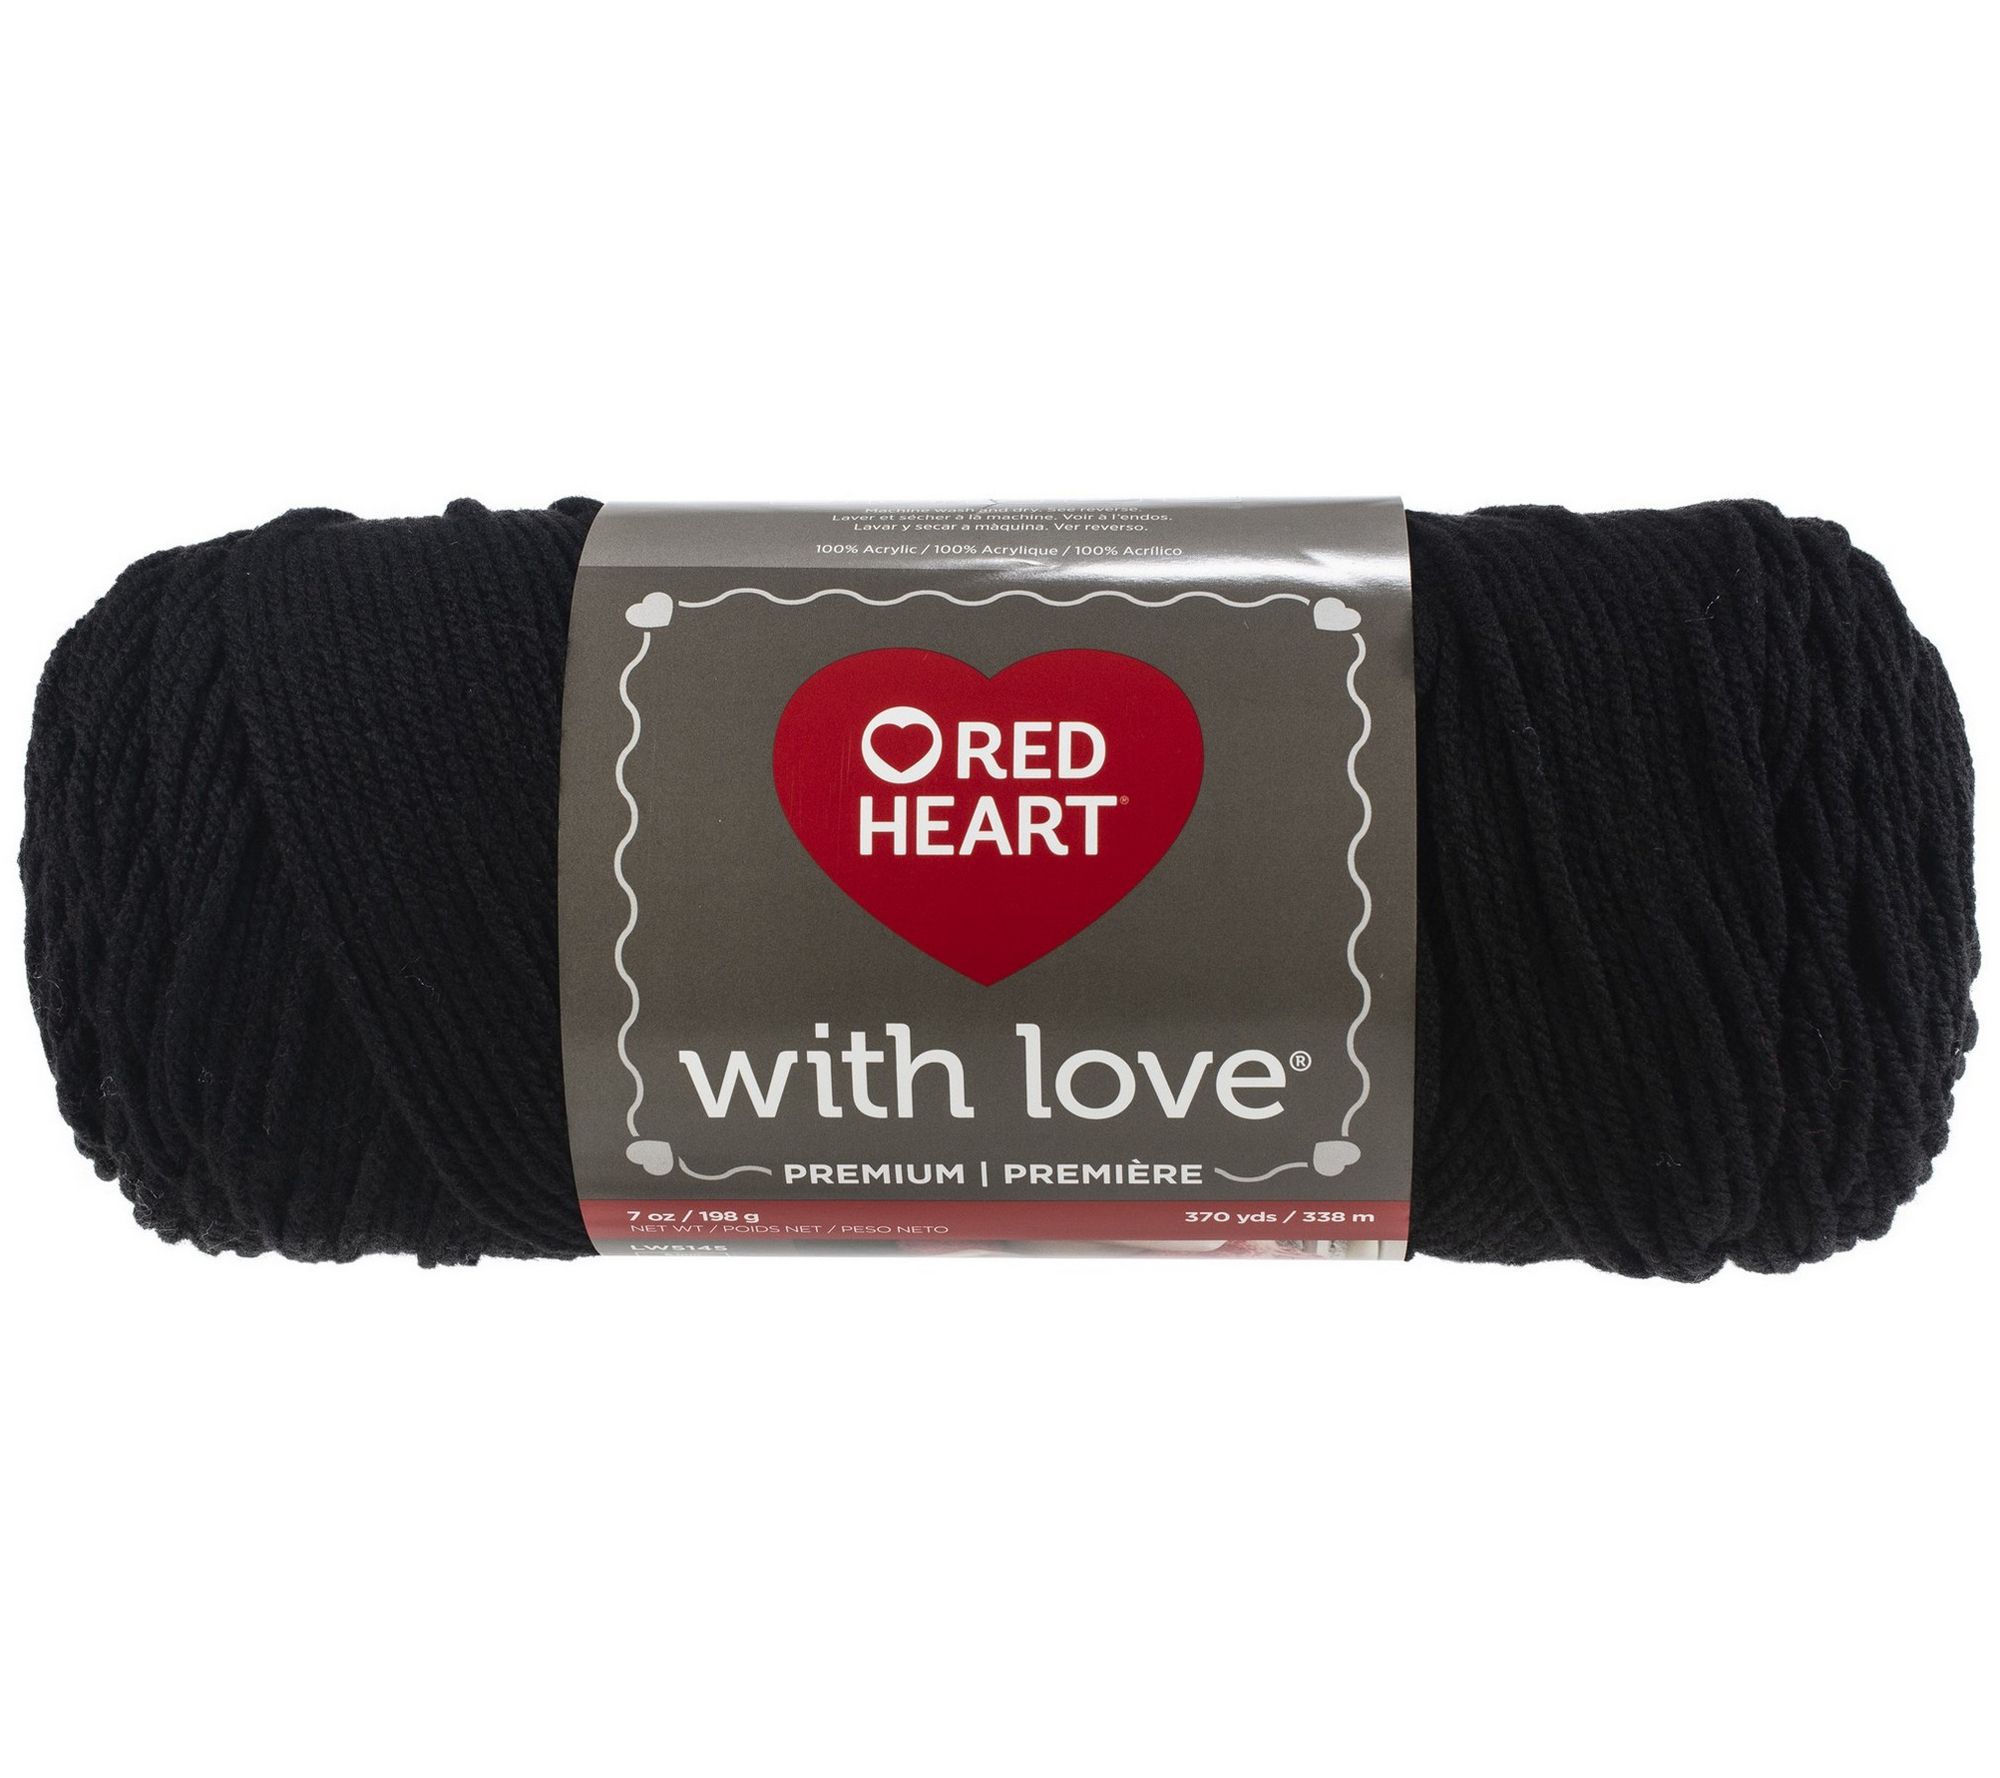 Wool & Knitting, Wool, Red Heart, With Love